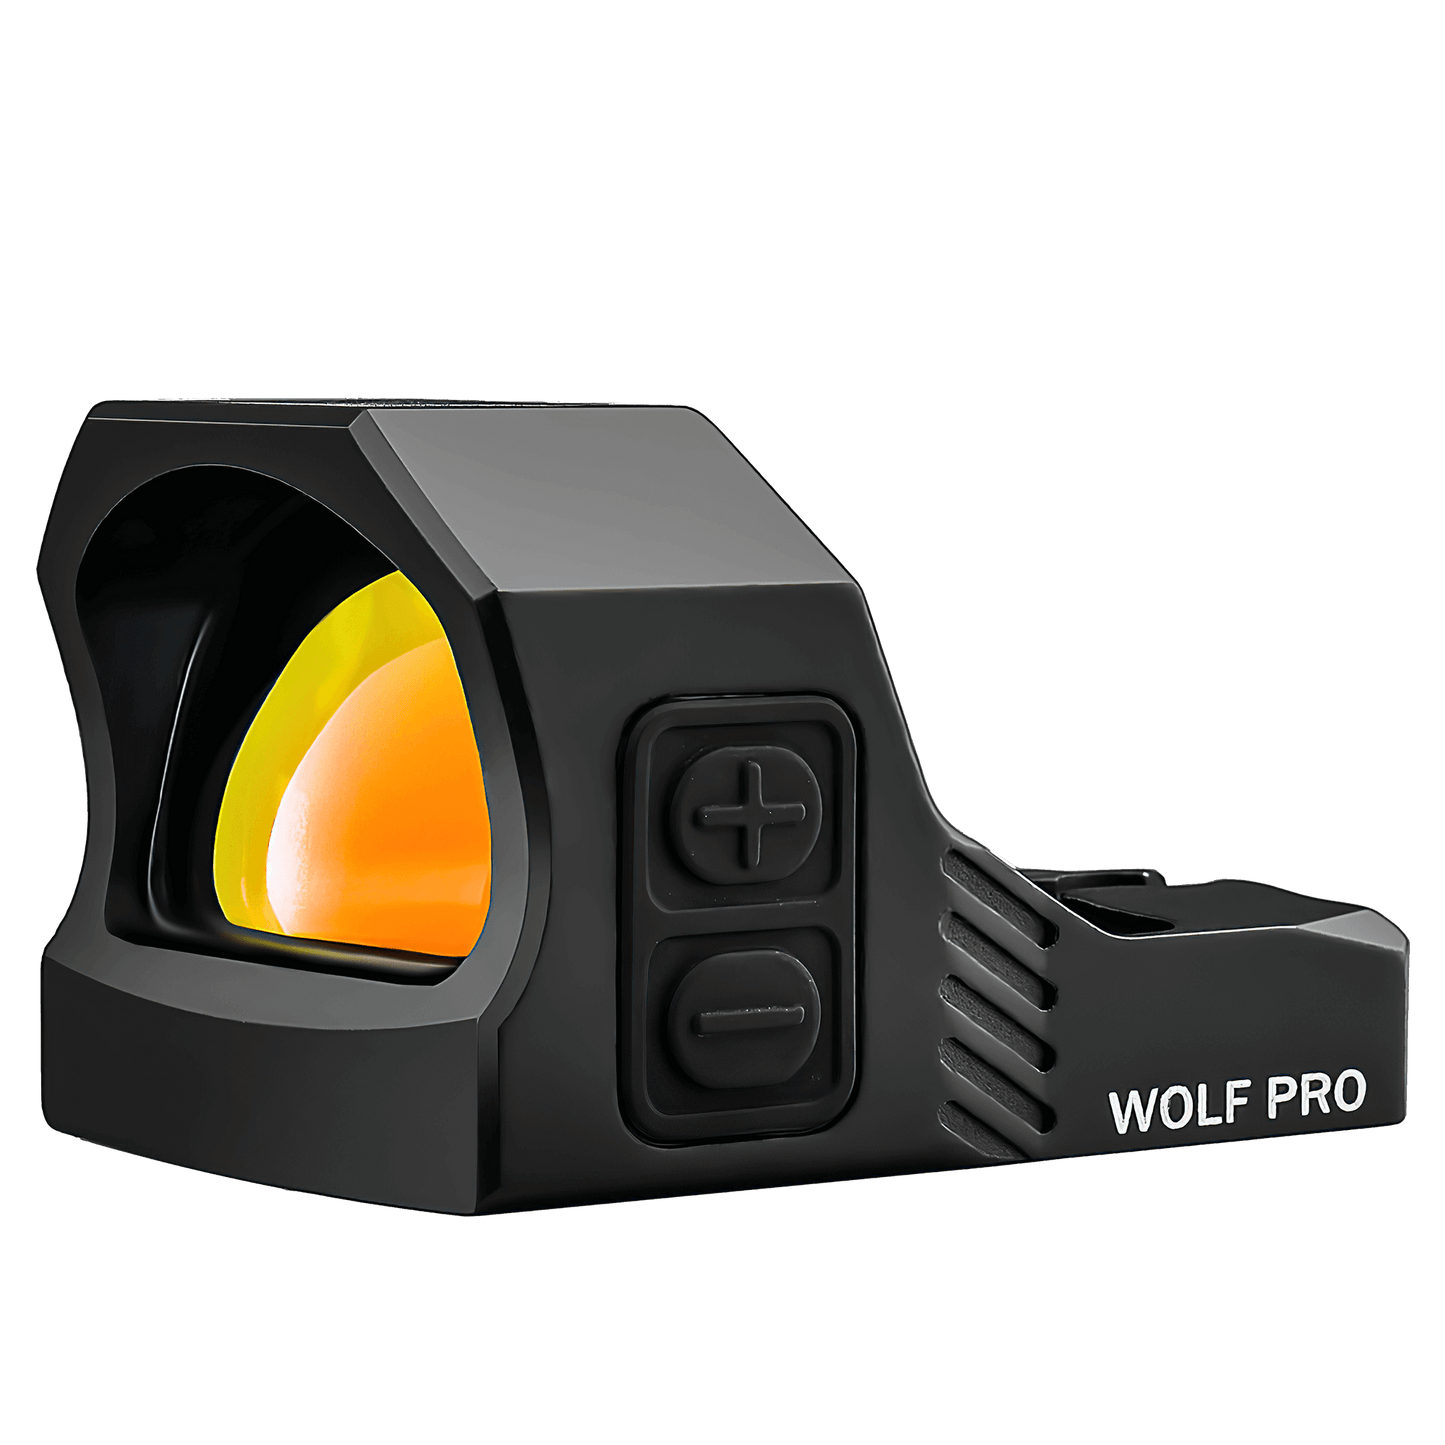 Cyelee WOLF PRO Duty & Carry Ready RMR Micro Red Dot with Motion Deactivated Standby